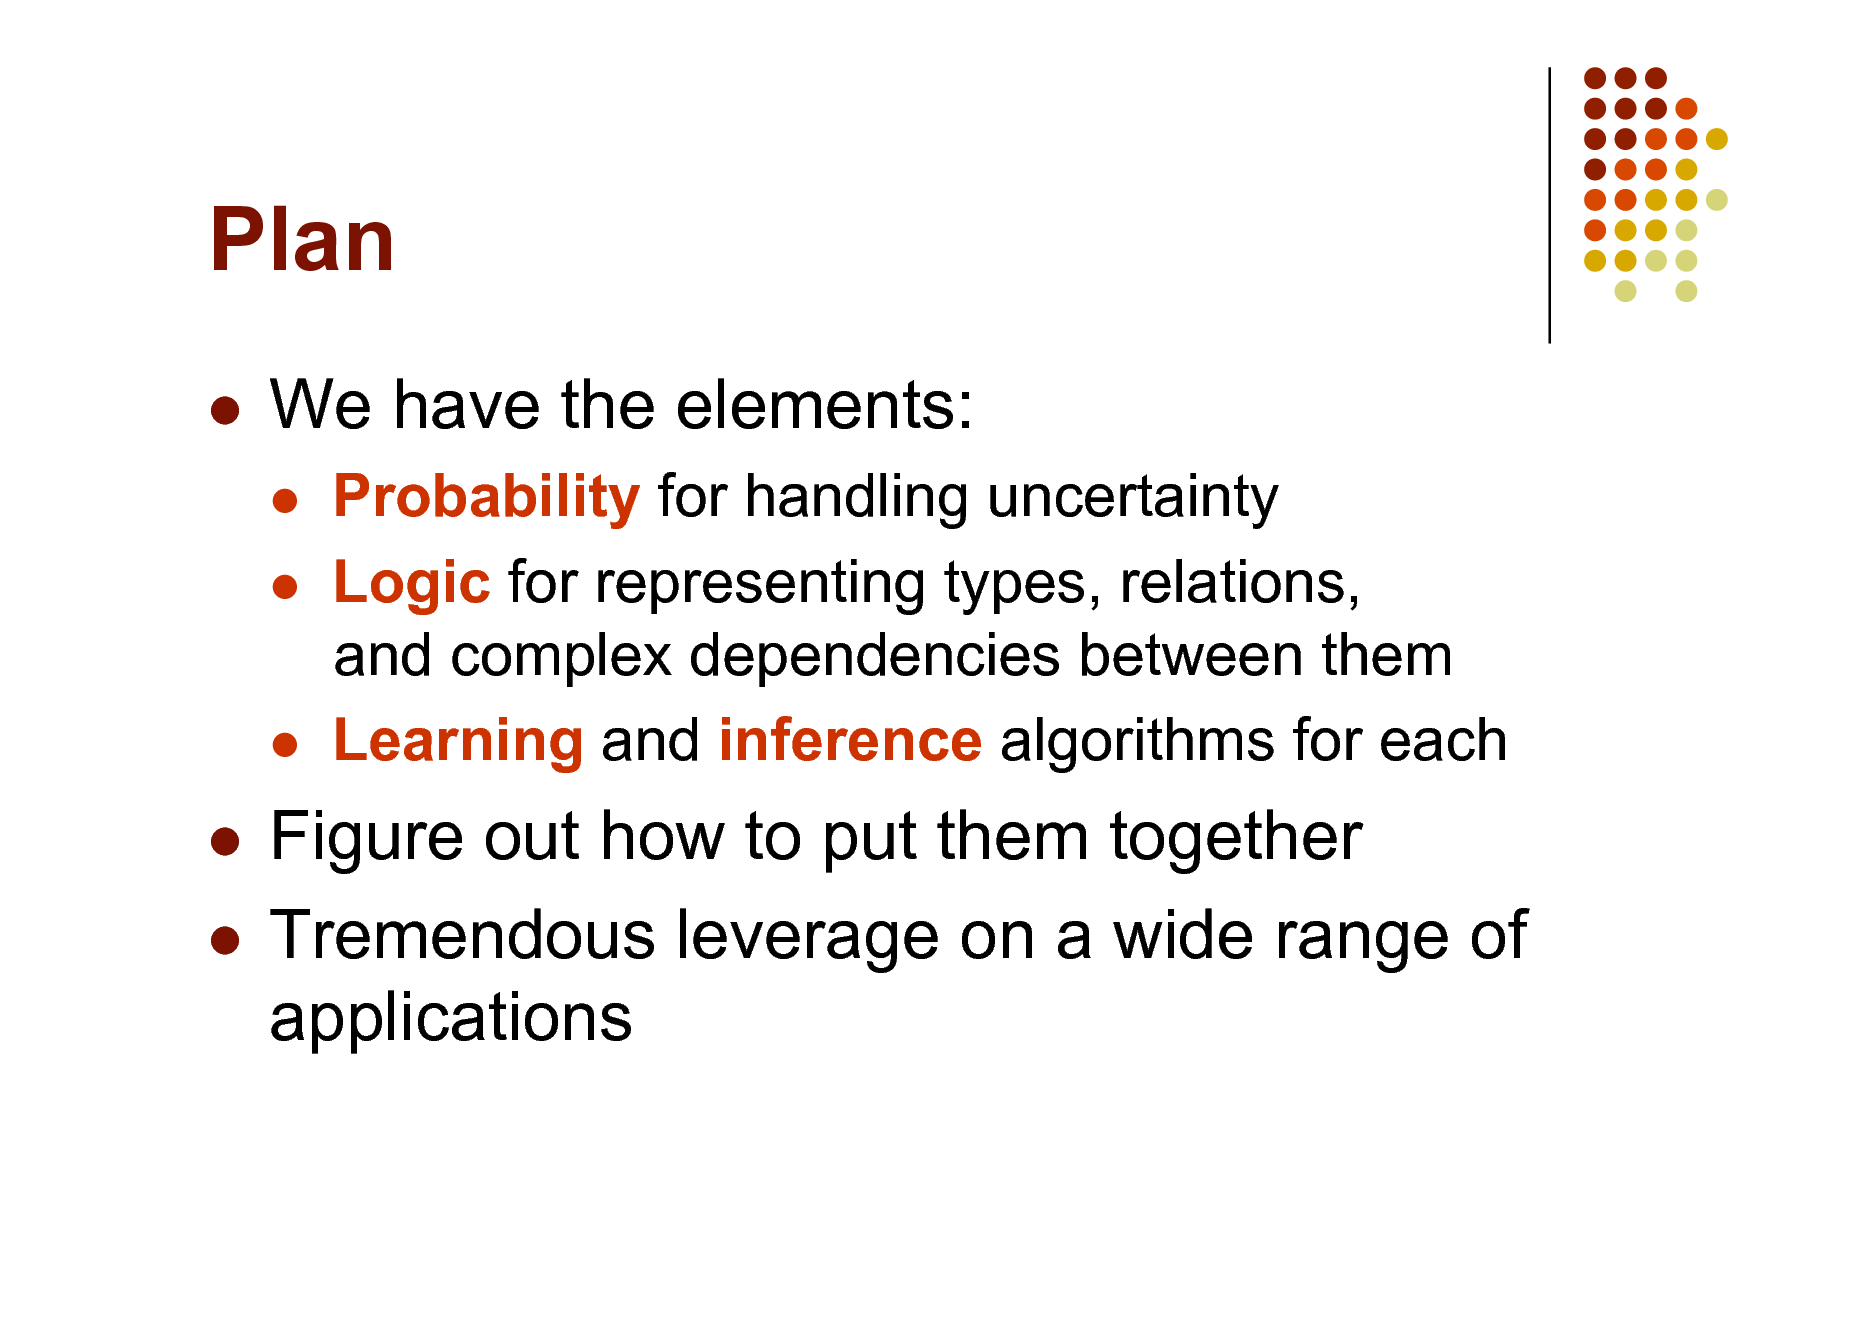 Slide: Plan


We have the elements:
 



Probability for handling uncertainty Logic for representing types, relations, and complex dependencies between them Learning and inference algorithms for each

Figure out how to put them together  Tremendous leverage on a wide range of applications


